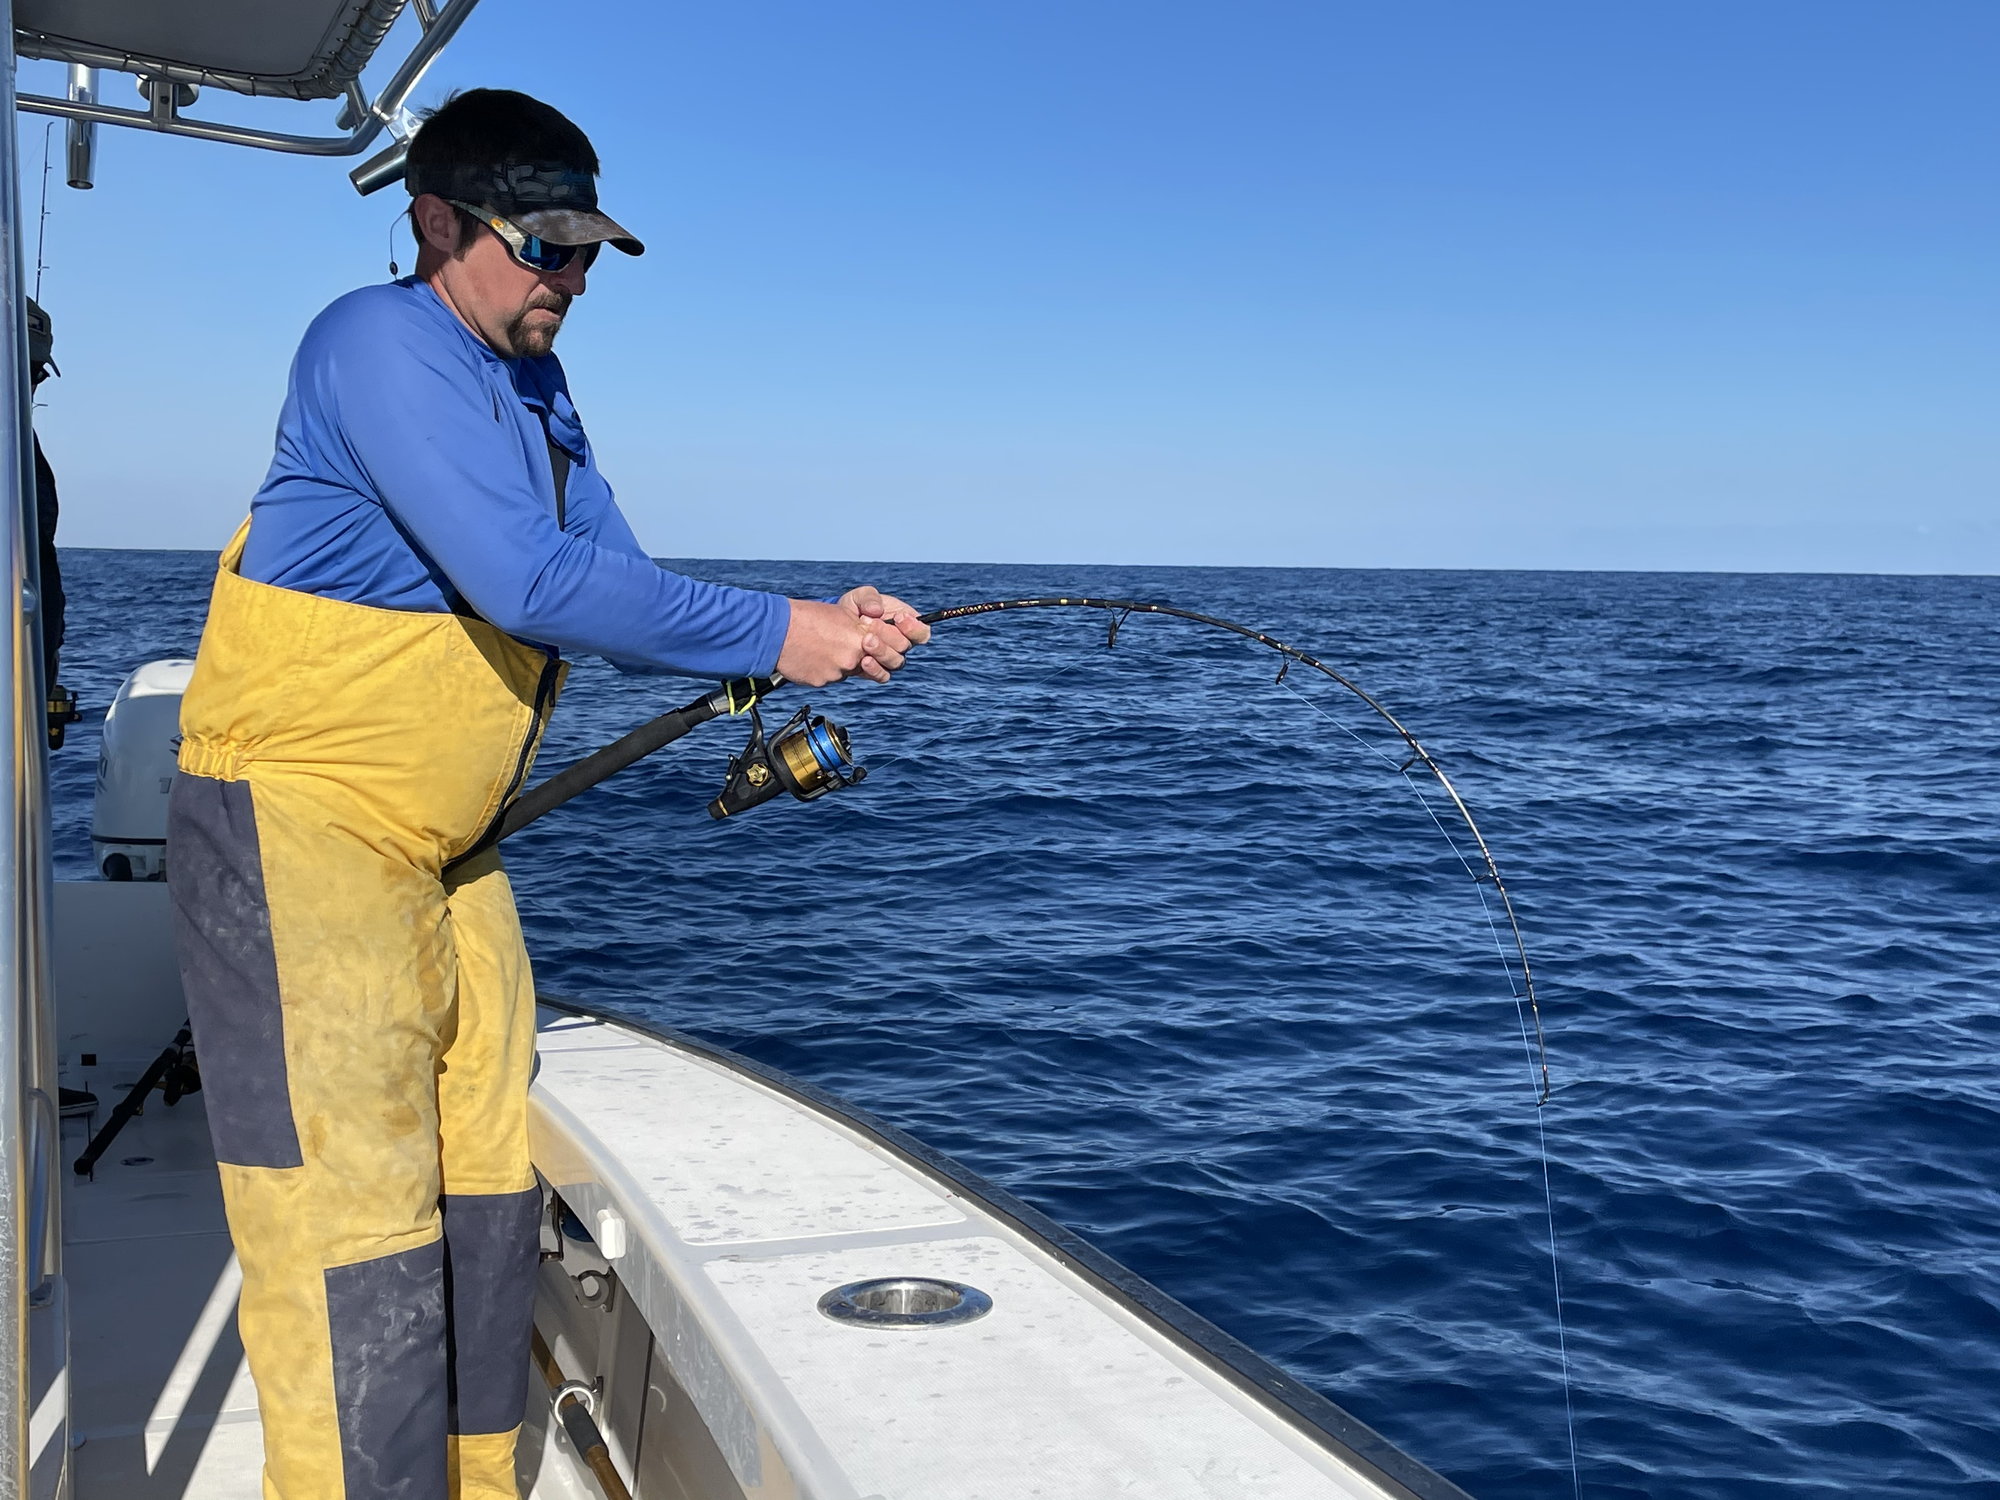 Need rod advice for sharks from the surf - The Hull Truth - Boating and  Fishing Forum